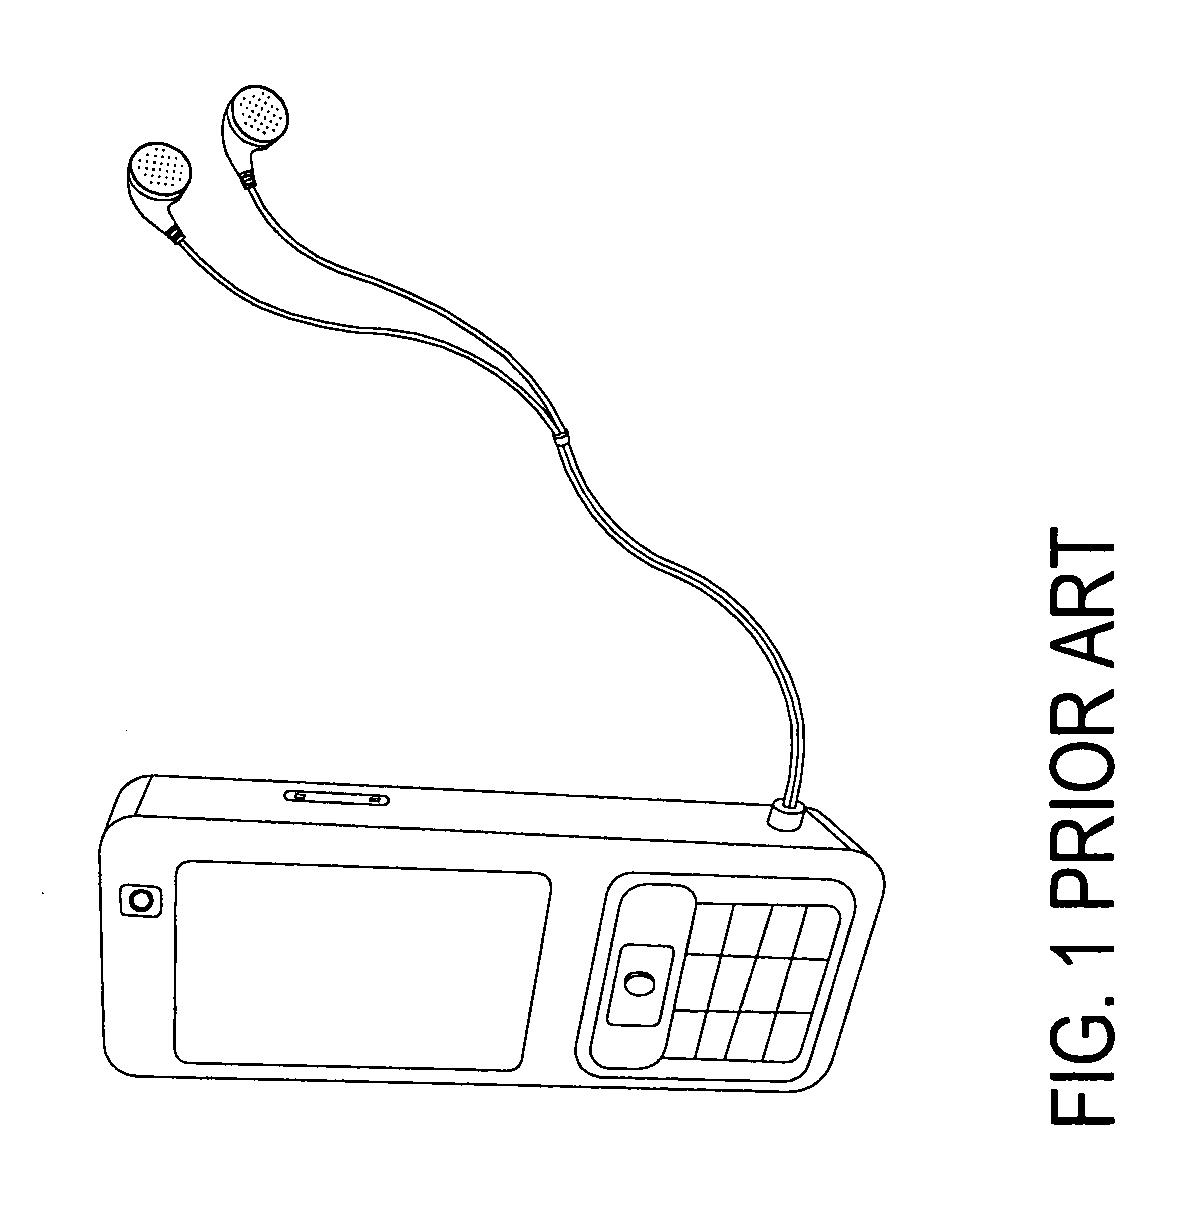 Portable electronic device with broadcast antenna